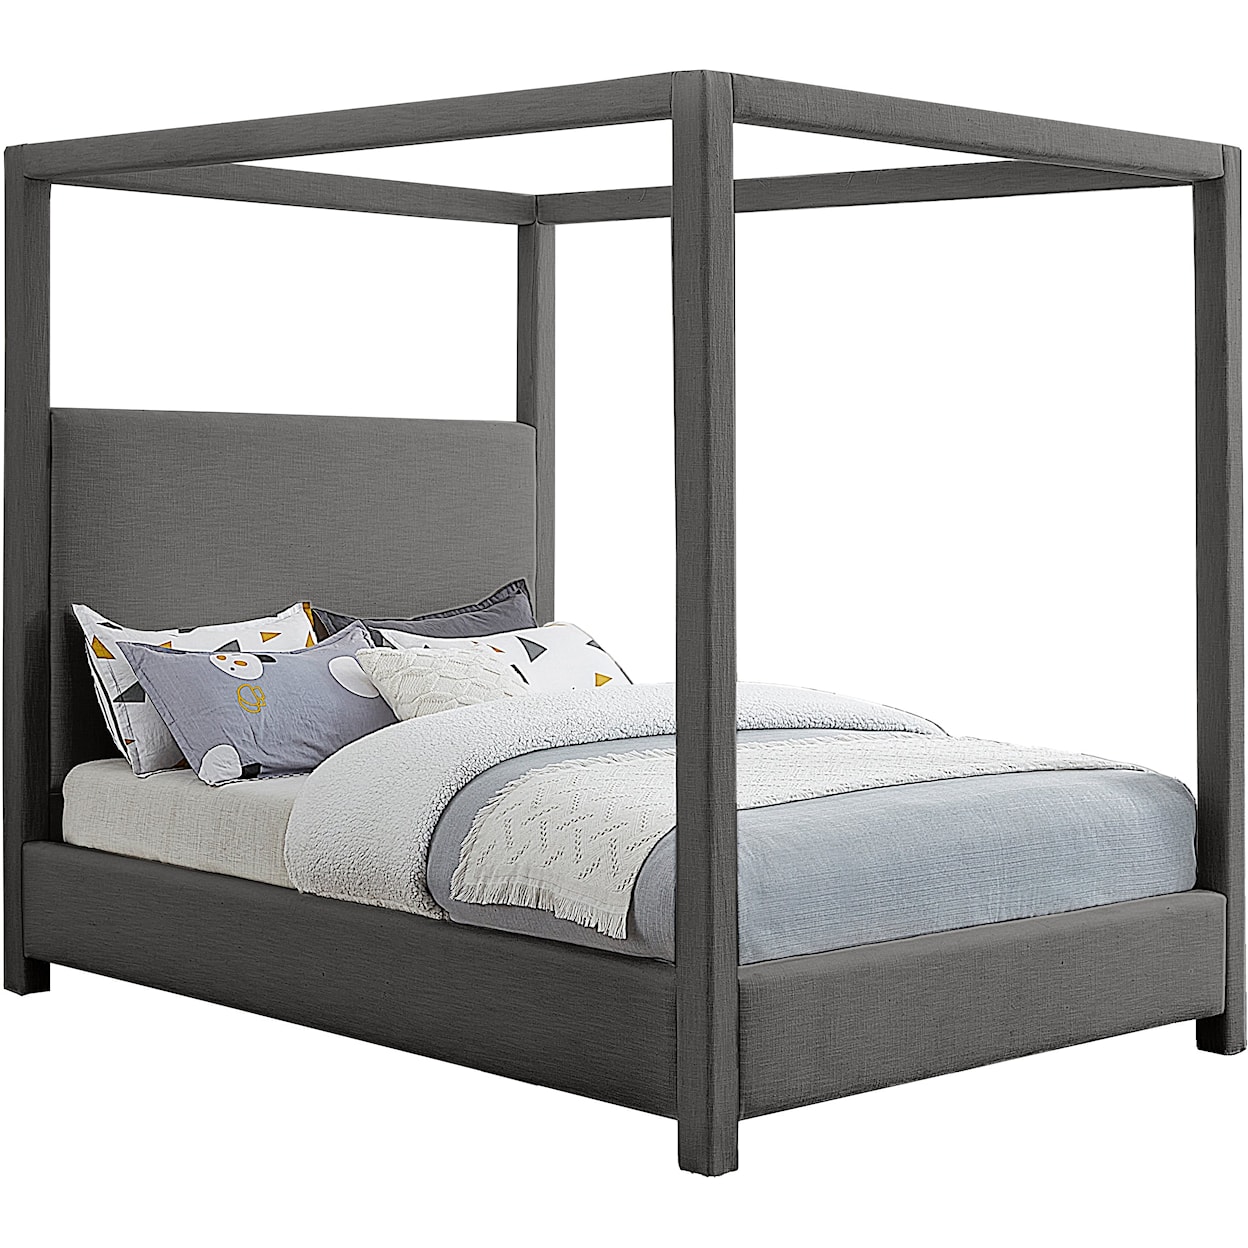 Meridian Furniture Emerson King Bed (3 Boxes)